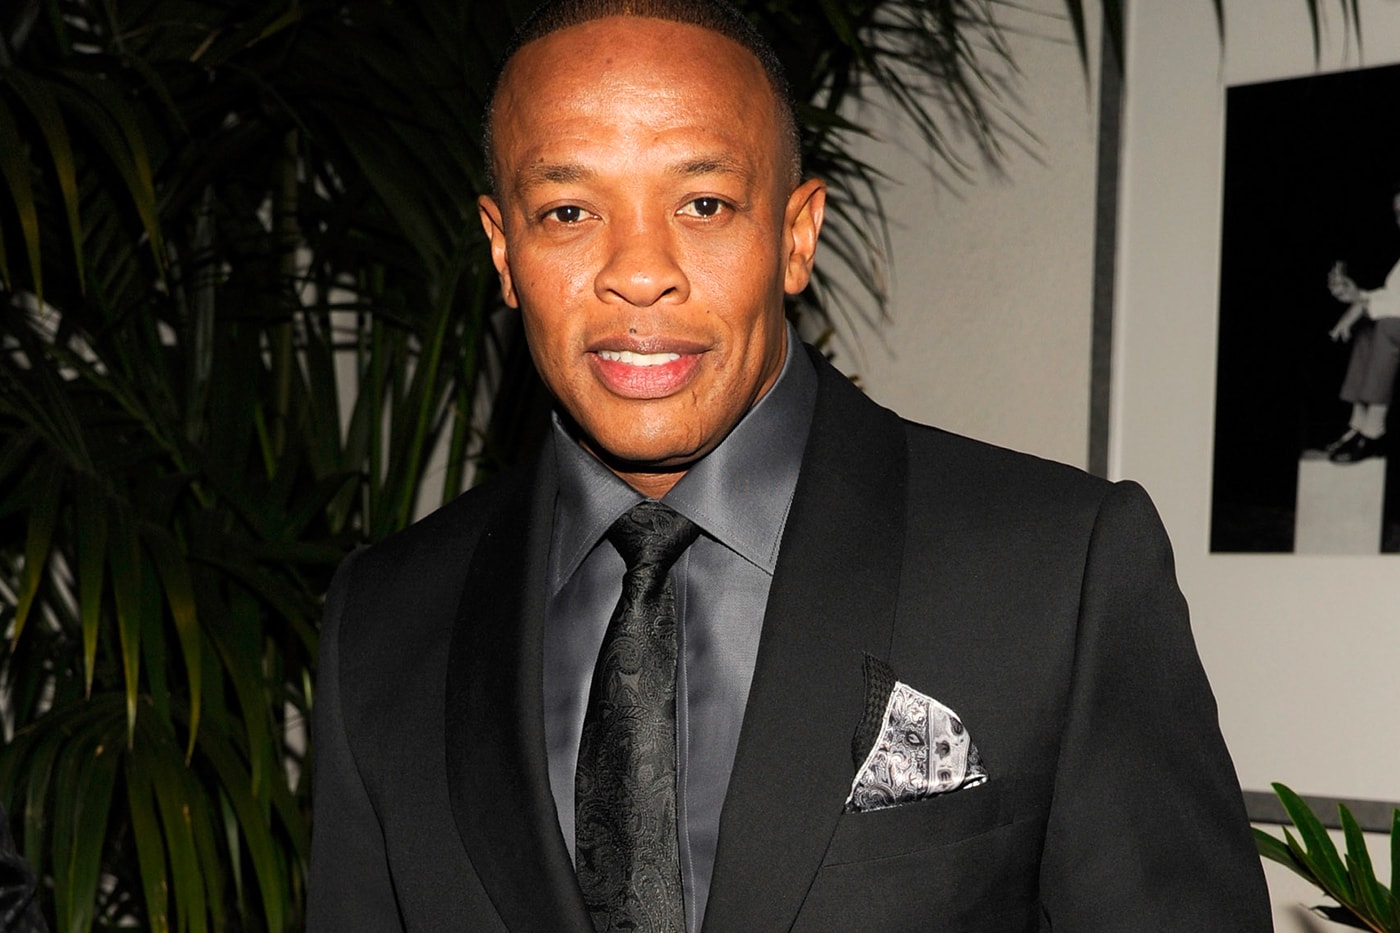 Dr. Dre Rumored to Be Working Detox Again brain aneurysm released from hospital nicole young compton